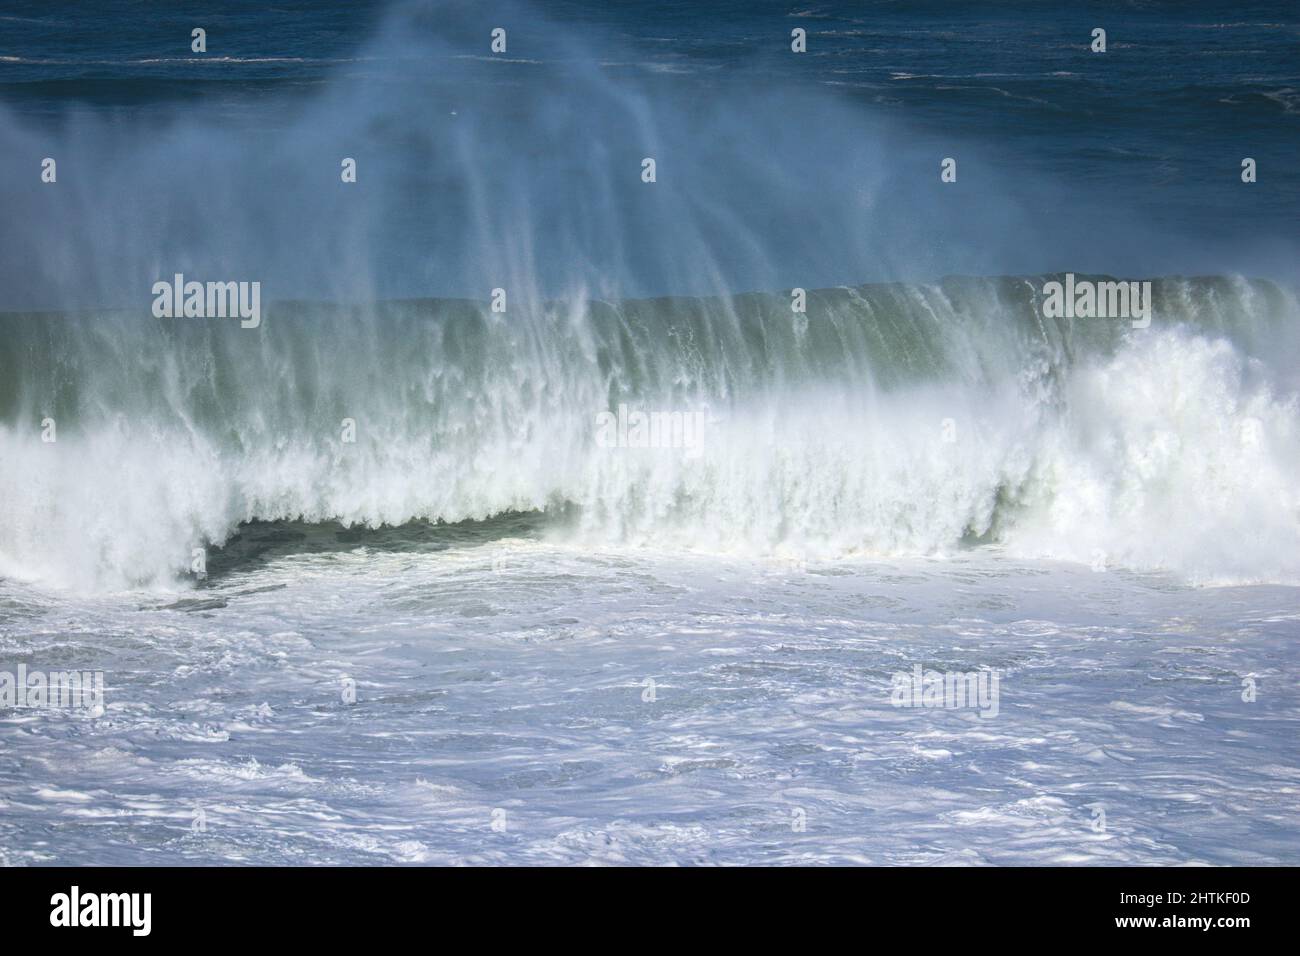 Big ocean waves in a stormy day Stock Photo